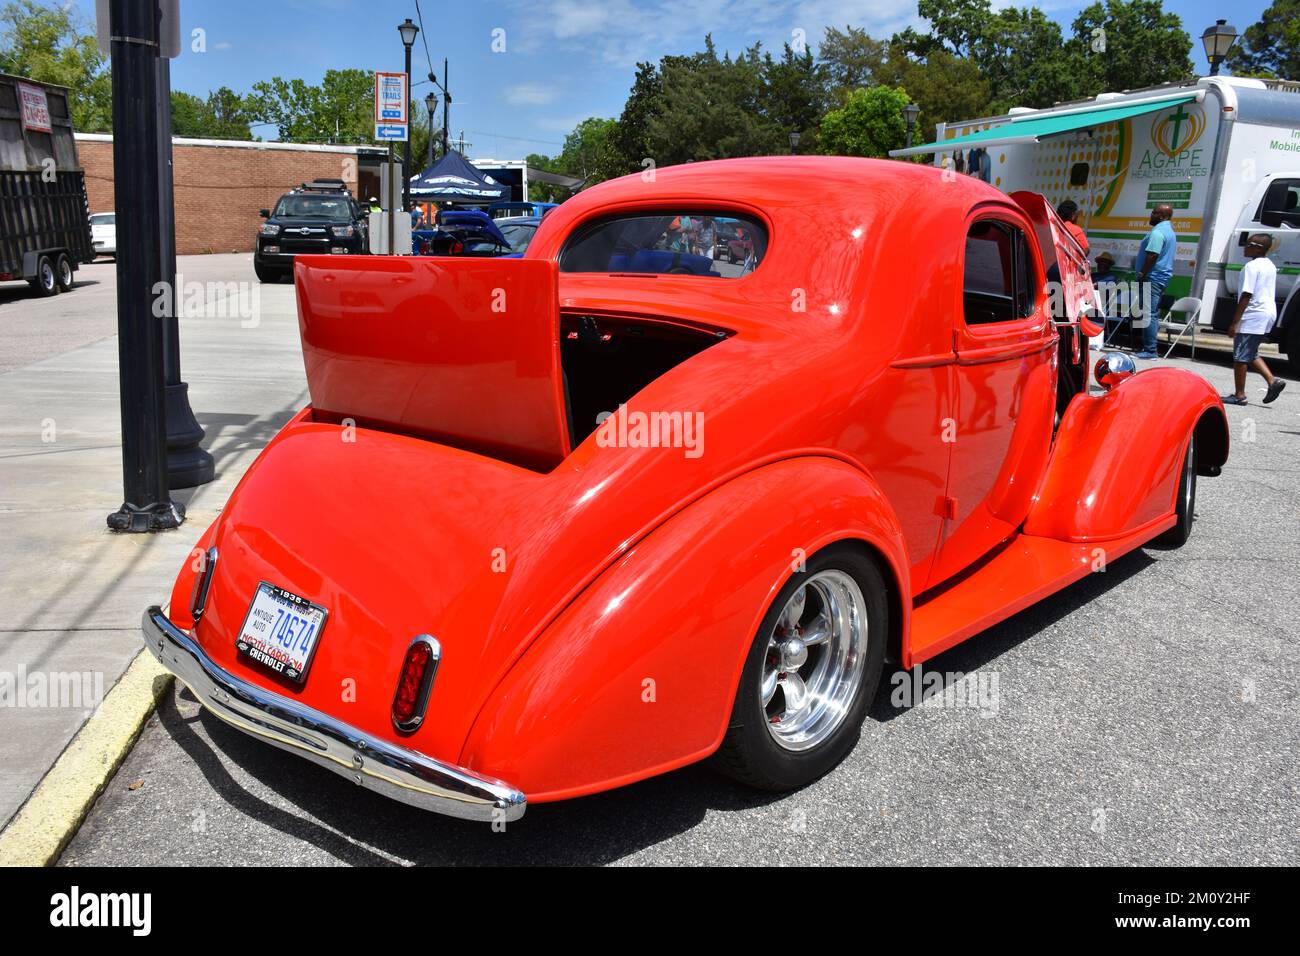 A 1935 Chevrolet Master Deluxe on display at a car show. Stock Photo